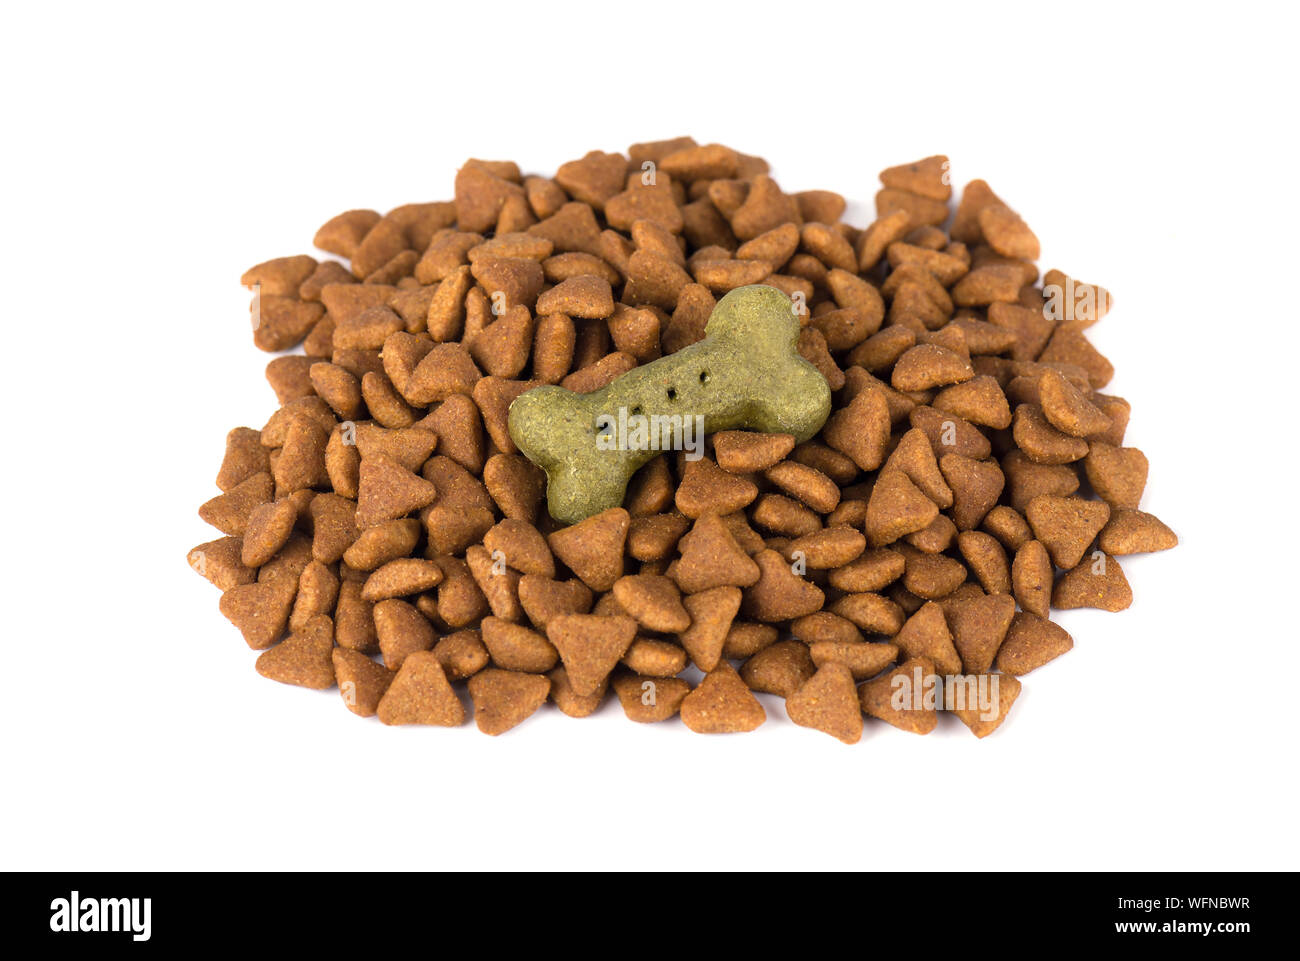 Dry food for dog and cat, isolated on white background Stock Photo